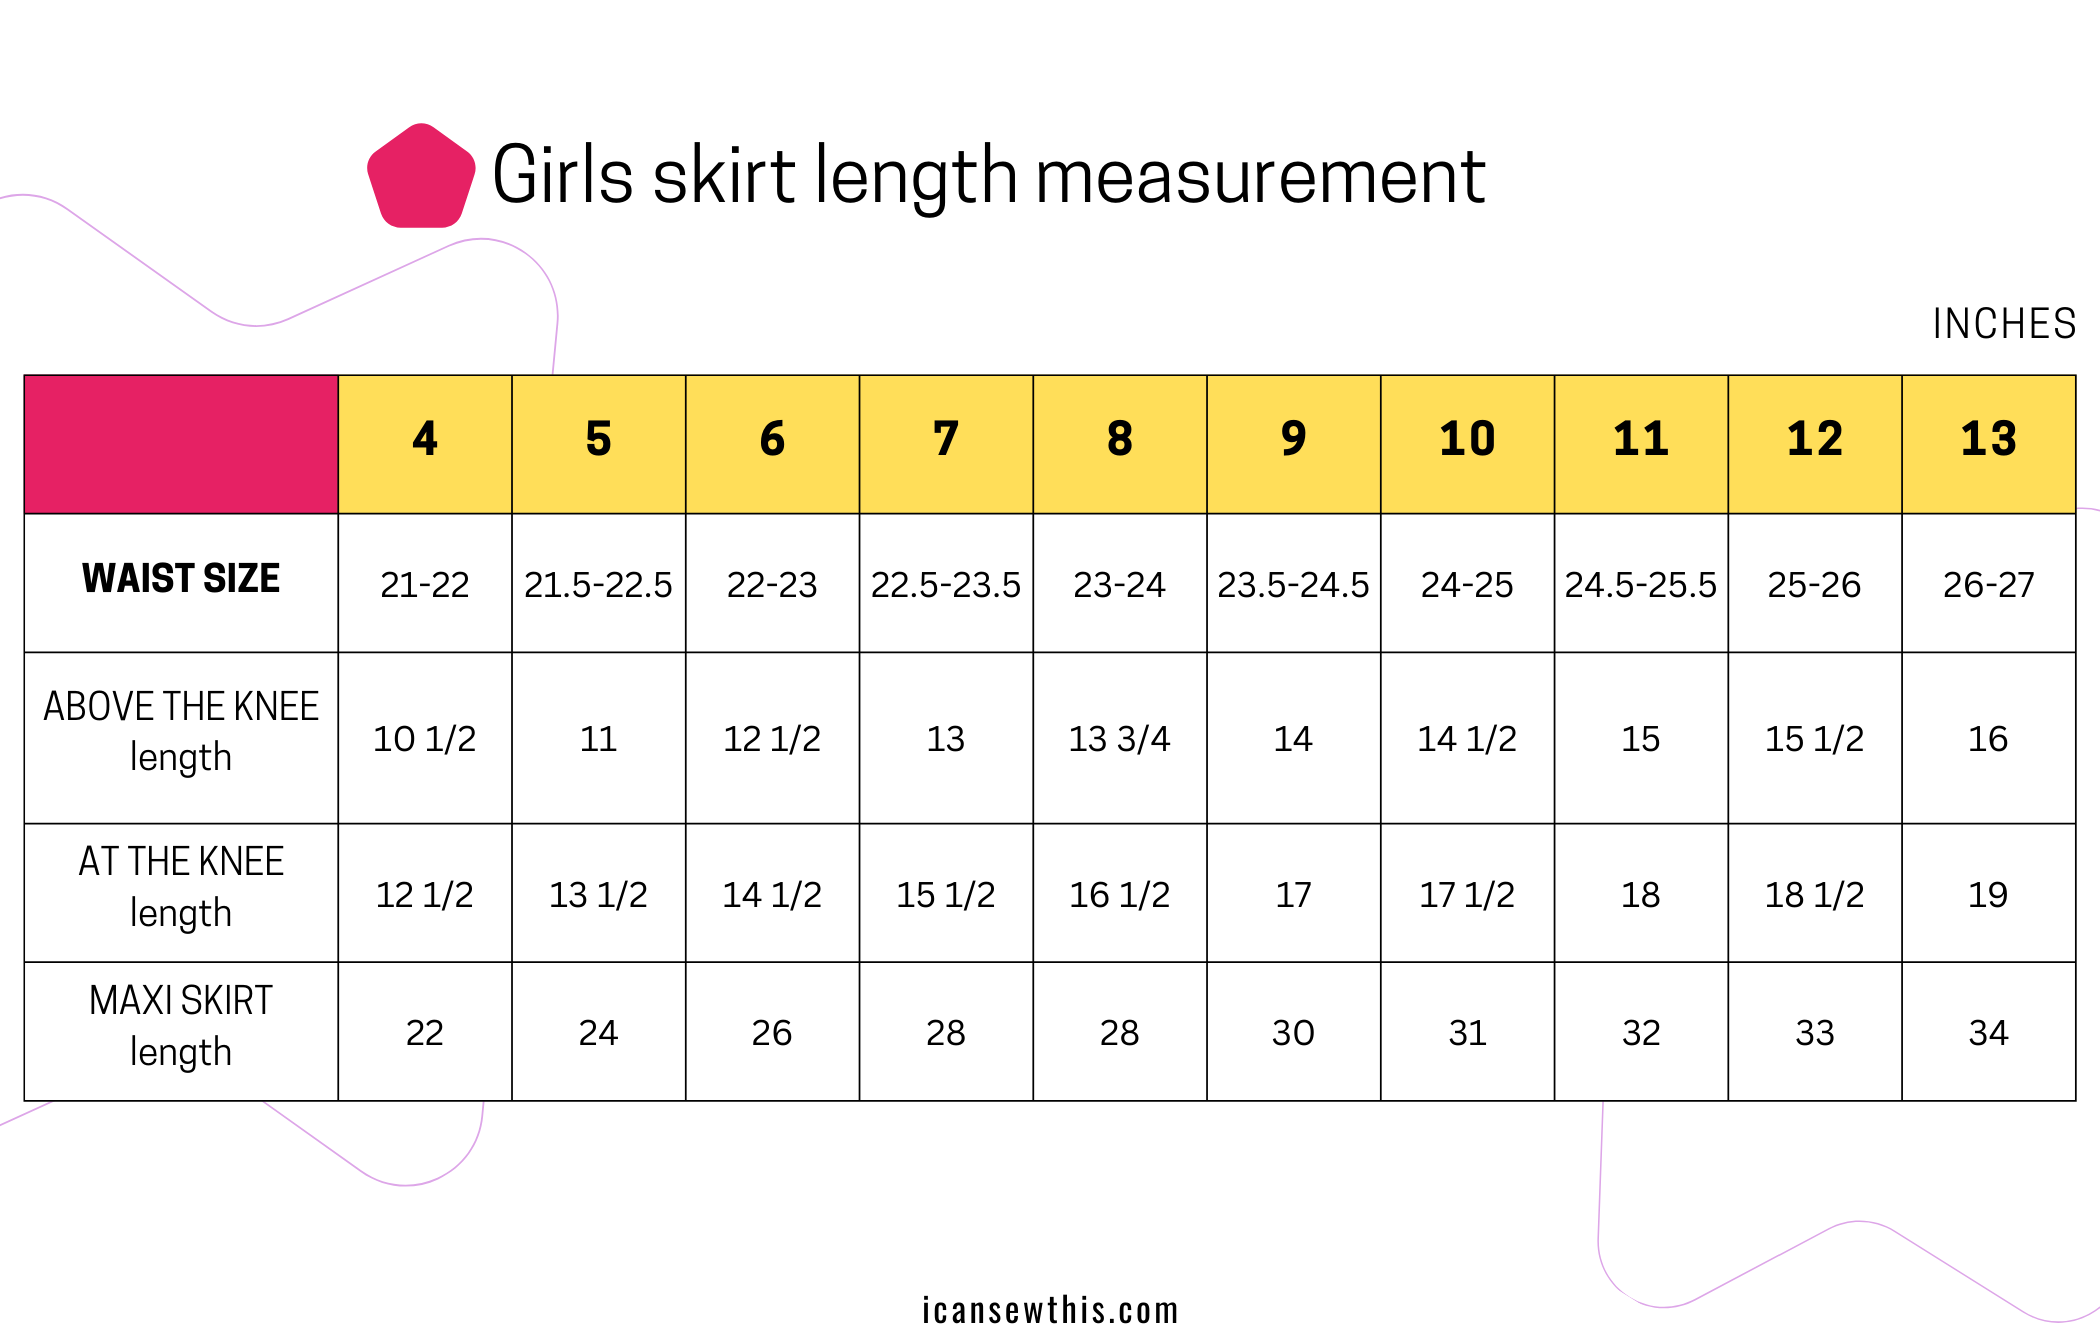 Girls skirt length measurements - a practical chart - I Can Sew This